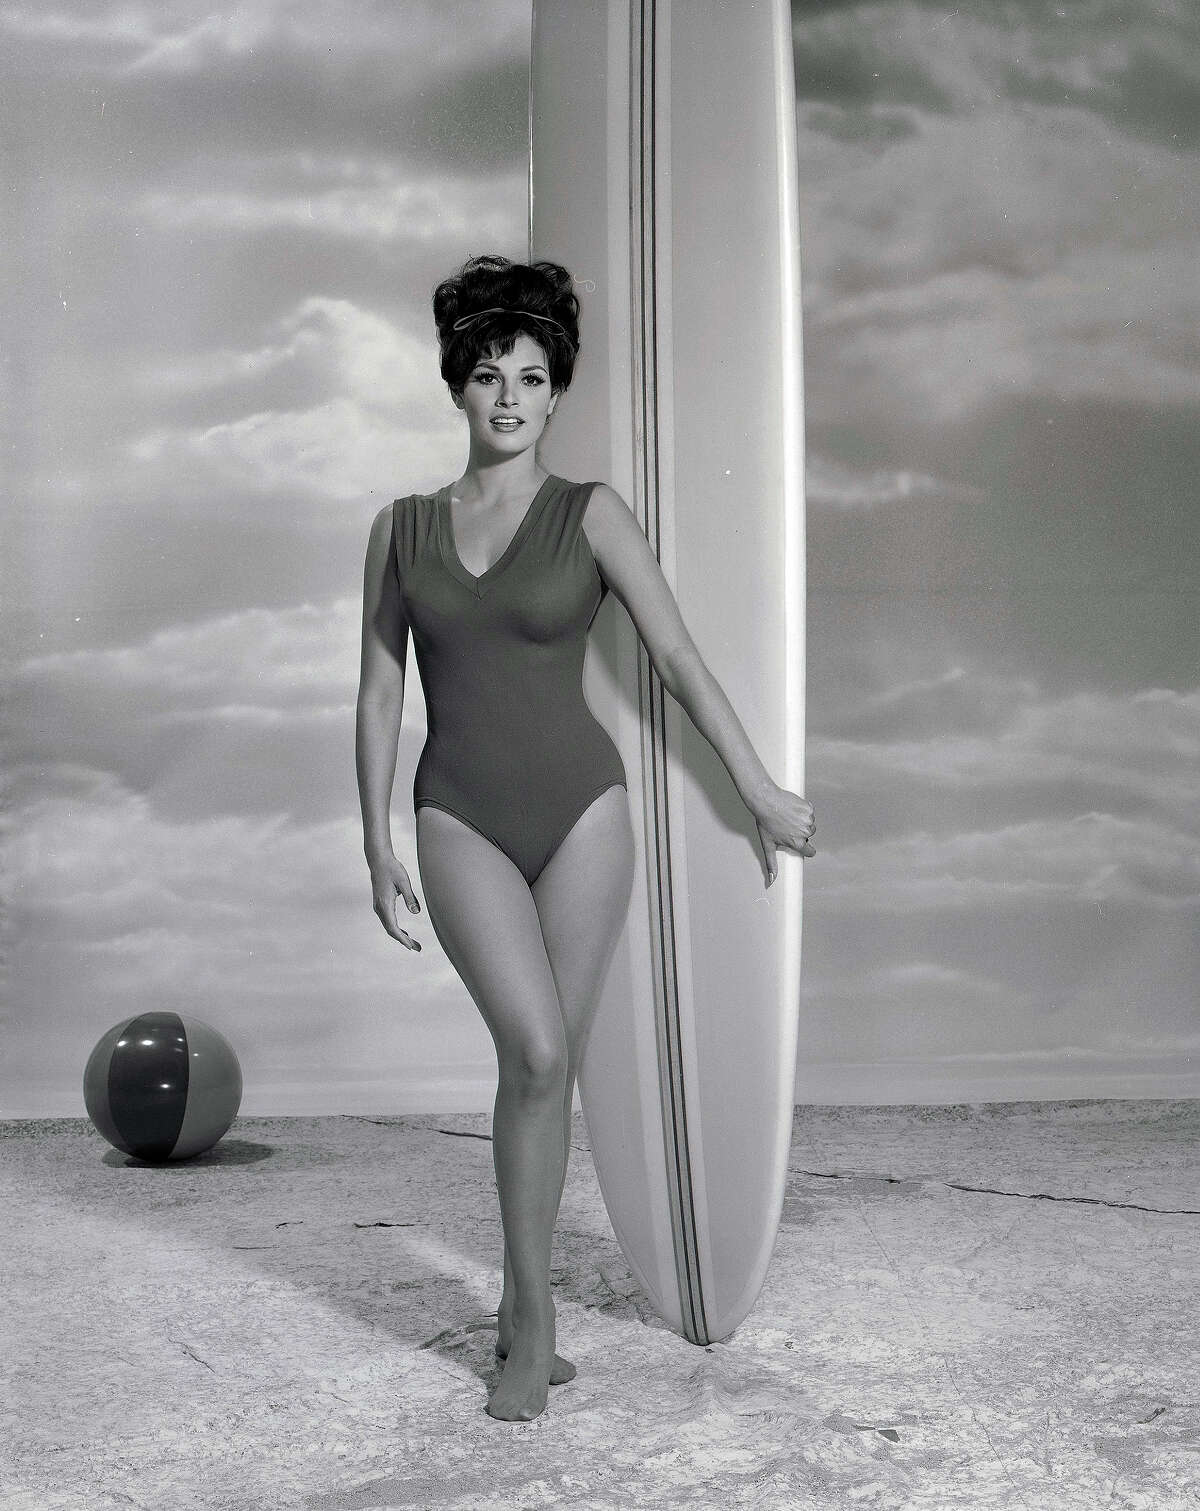 Raquel Welch in 1964. More photos: Famous movie bikinis